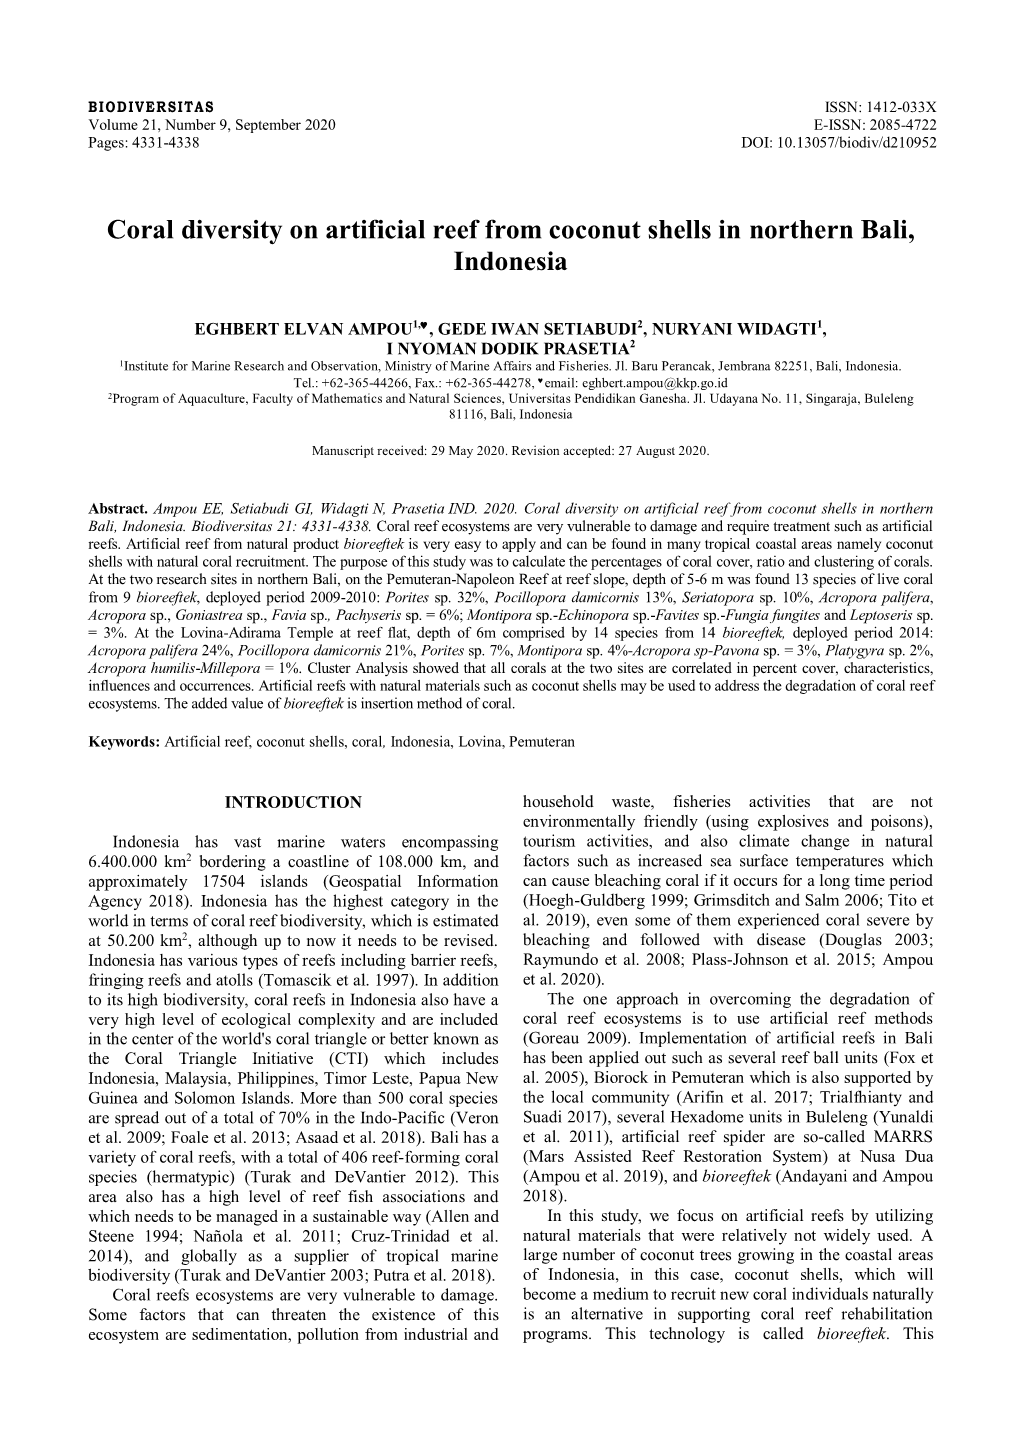 Coral Diversity on Artificial Reef from Coconut Shells in Northern Bali, Indonesia